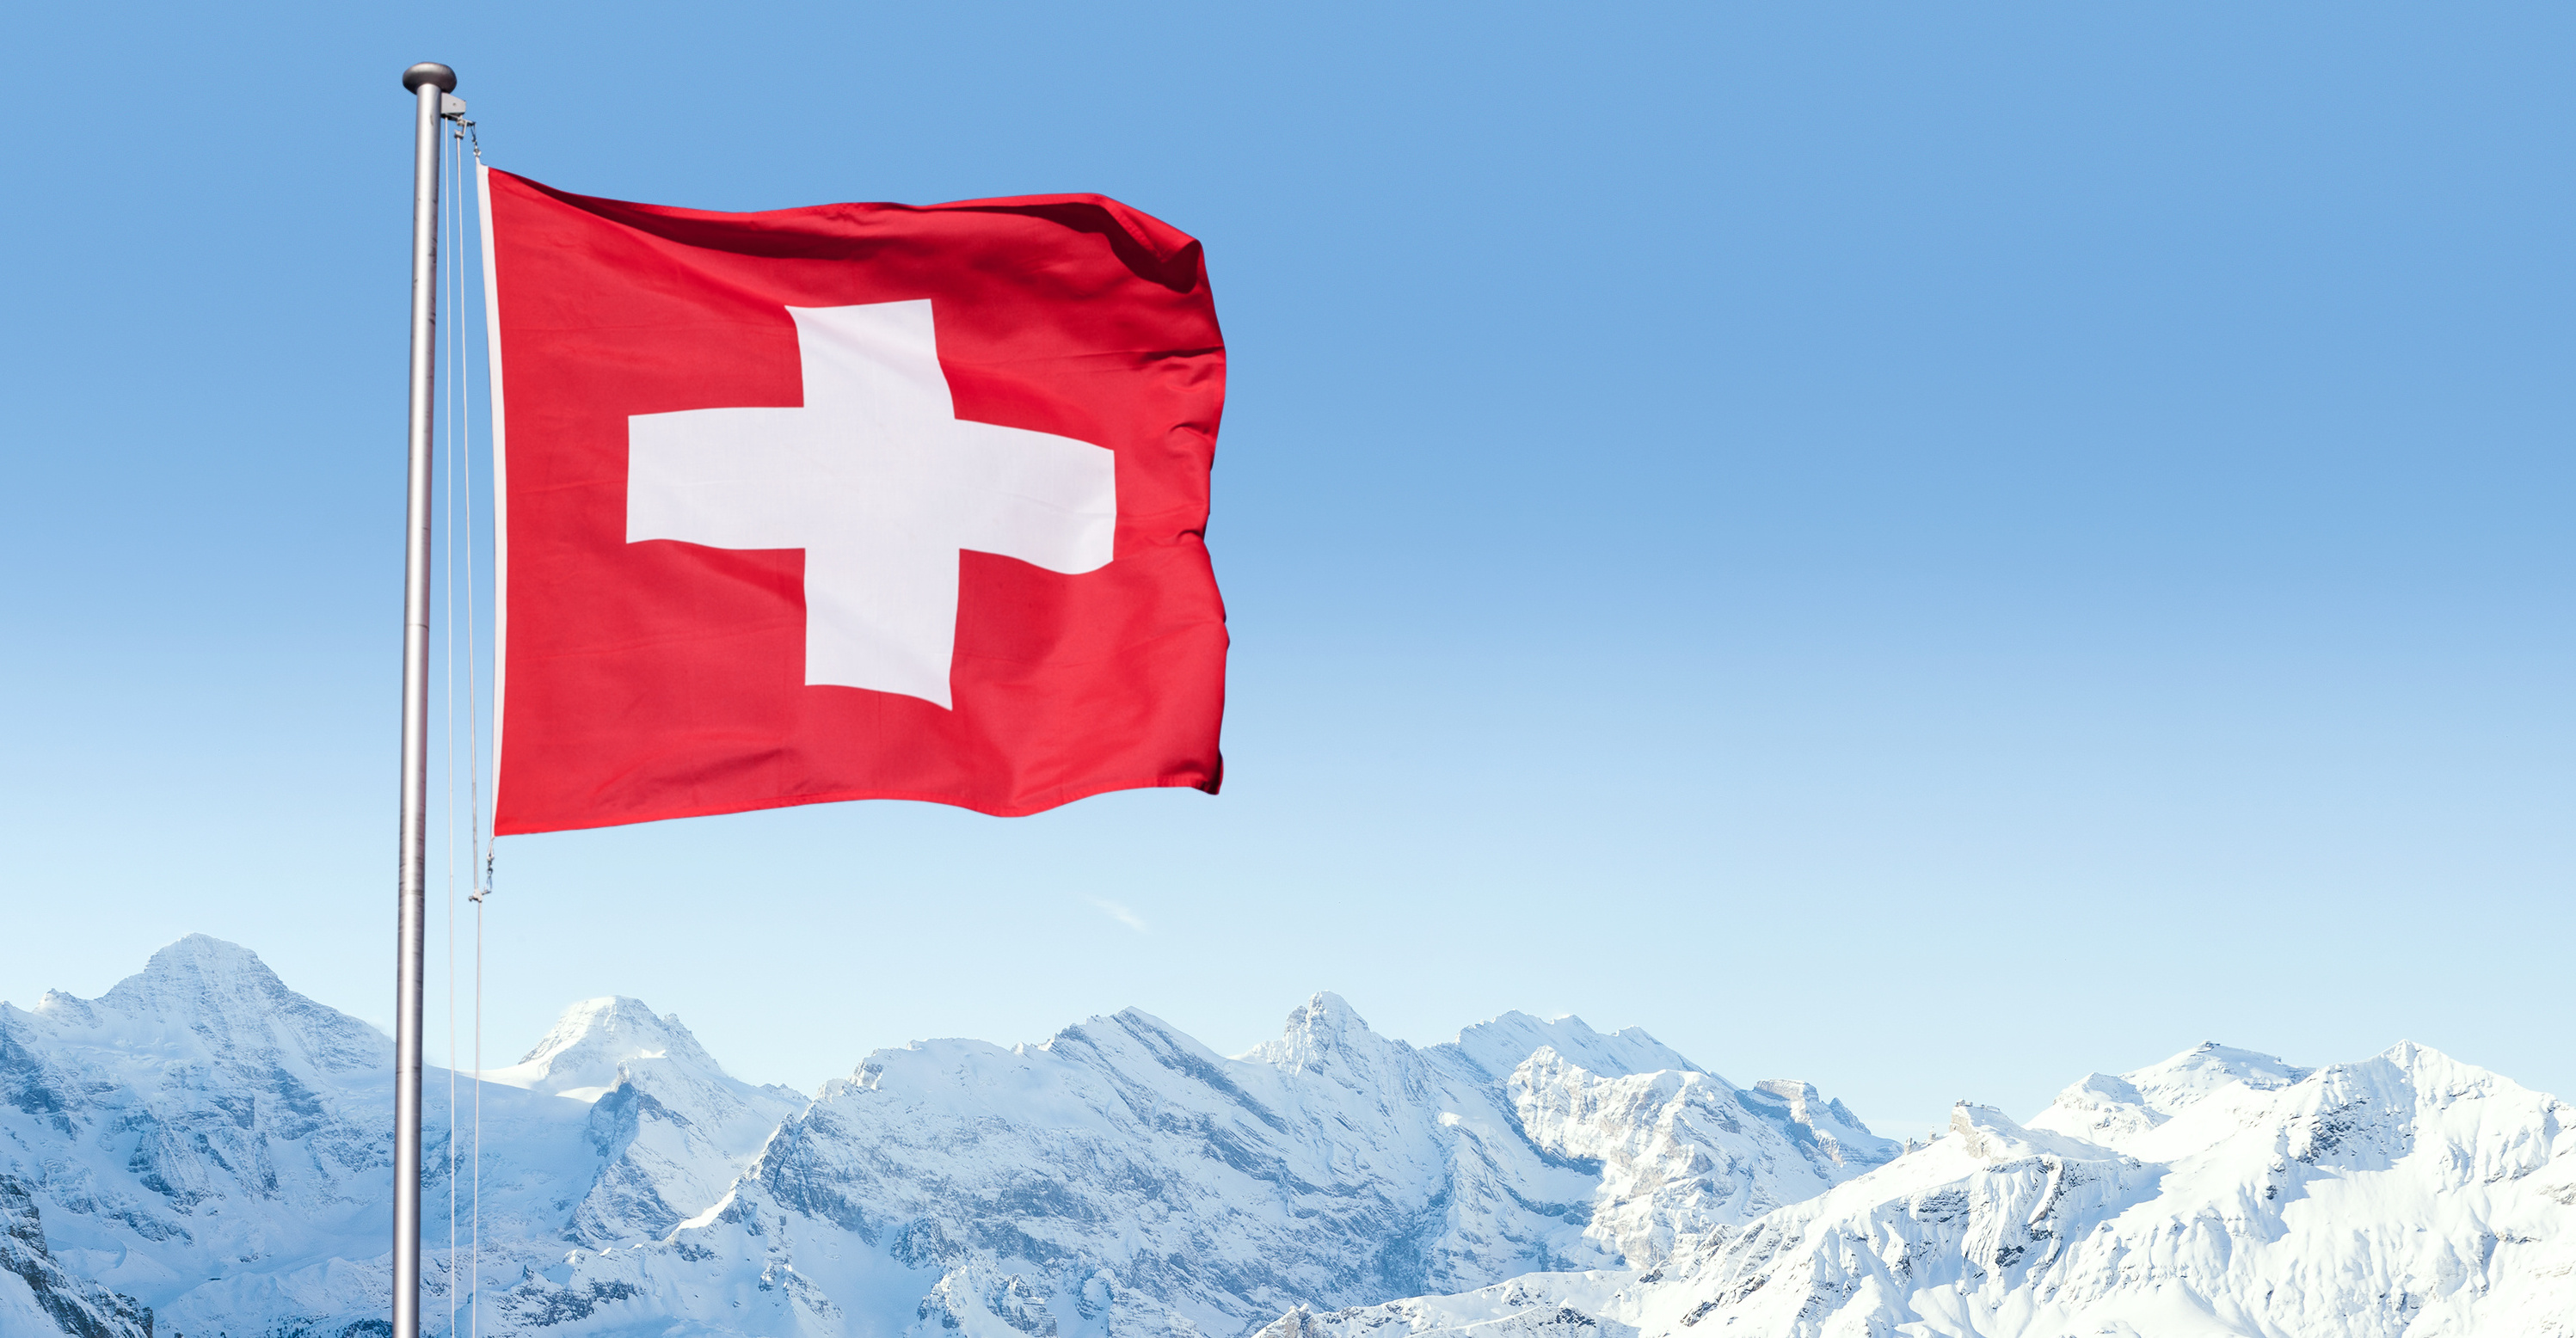 Swiss flag with snowy mountain landscape